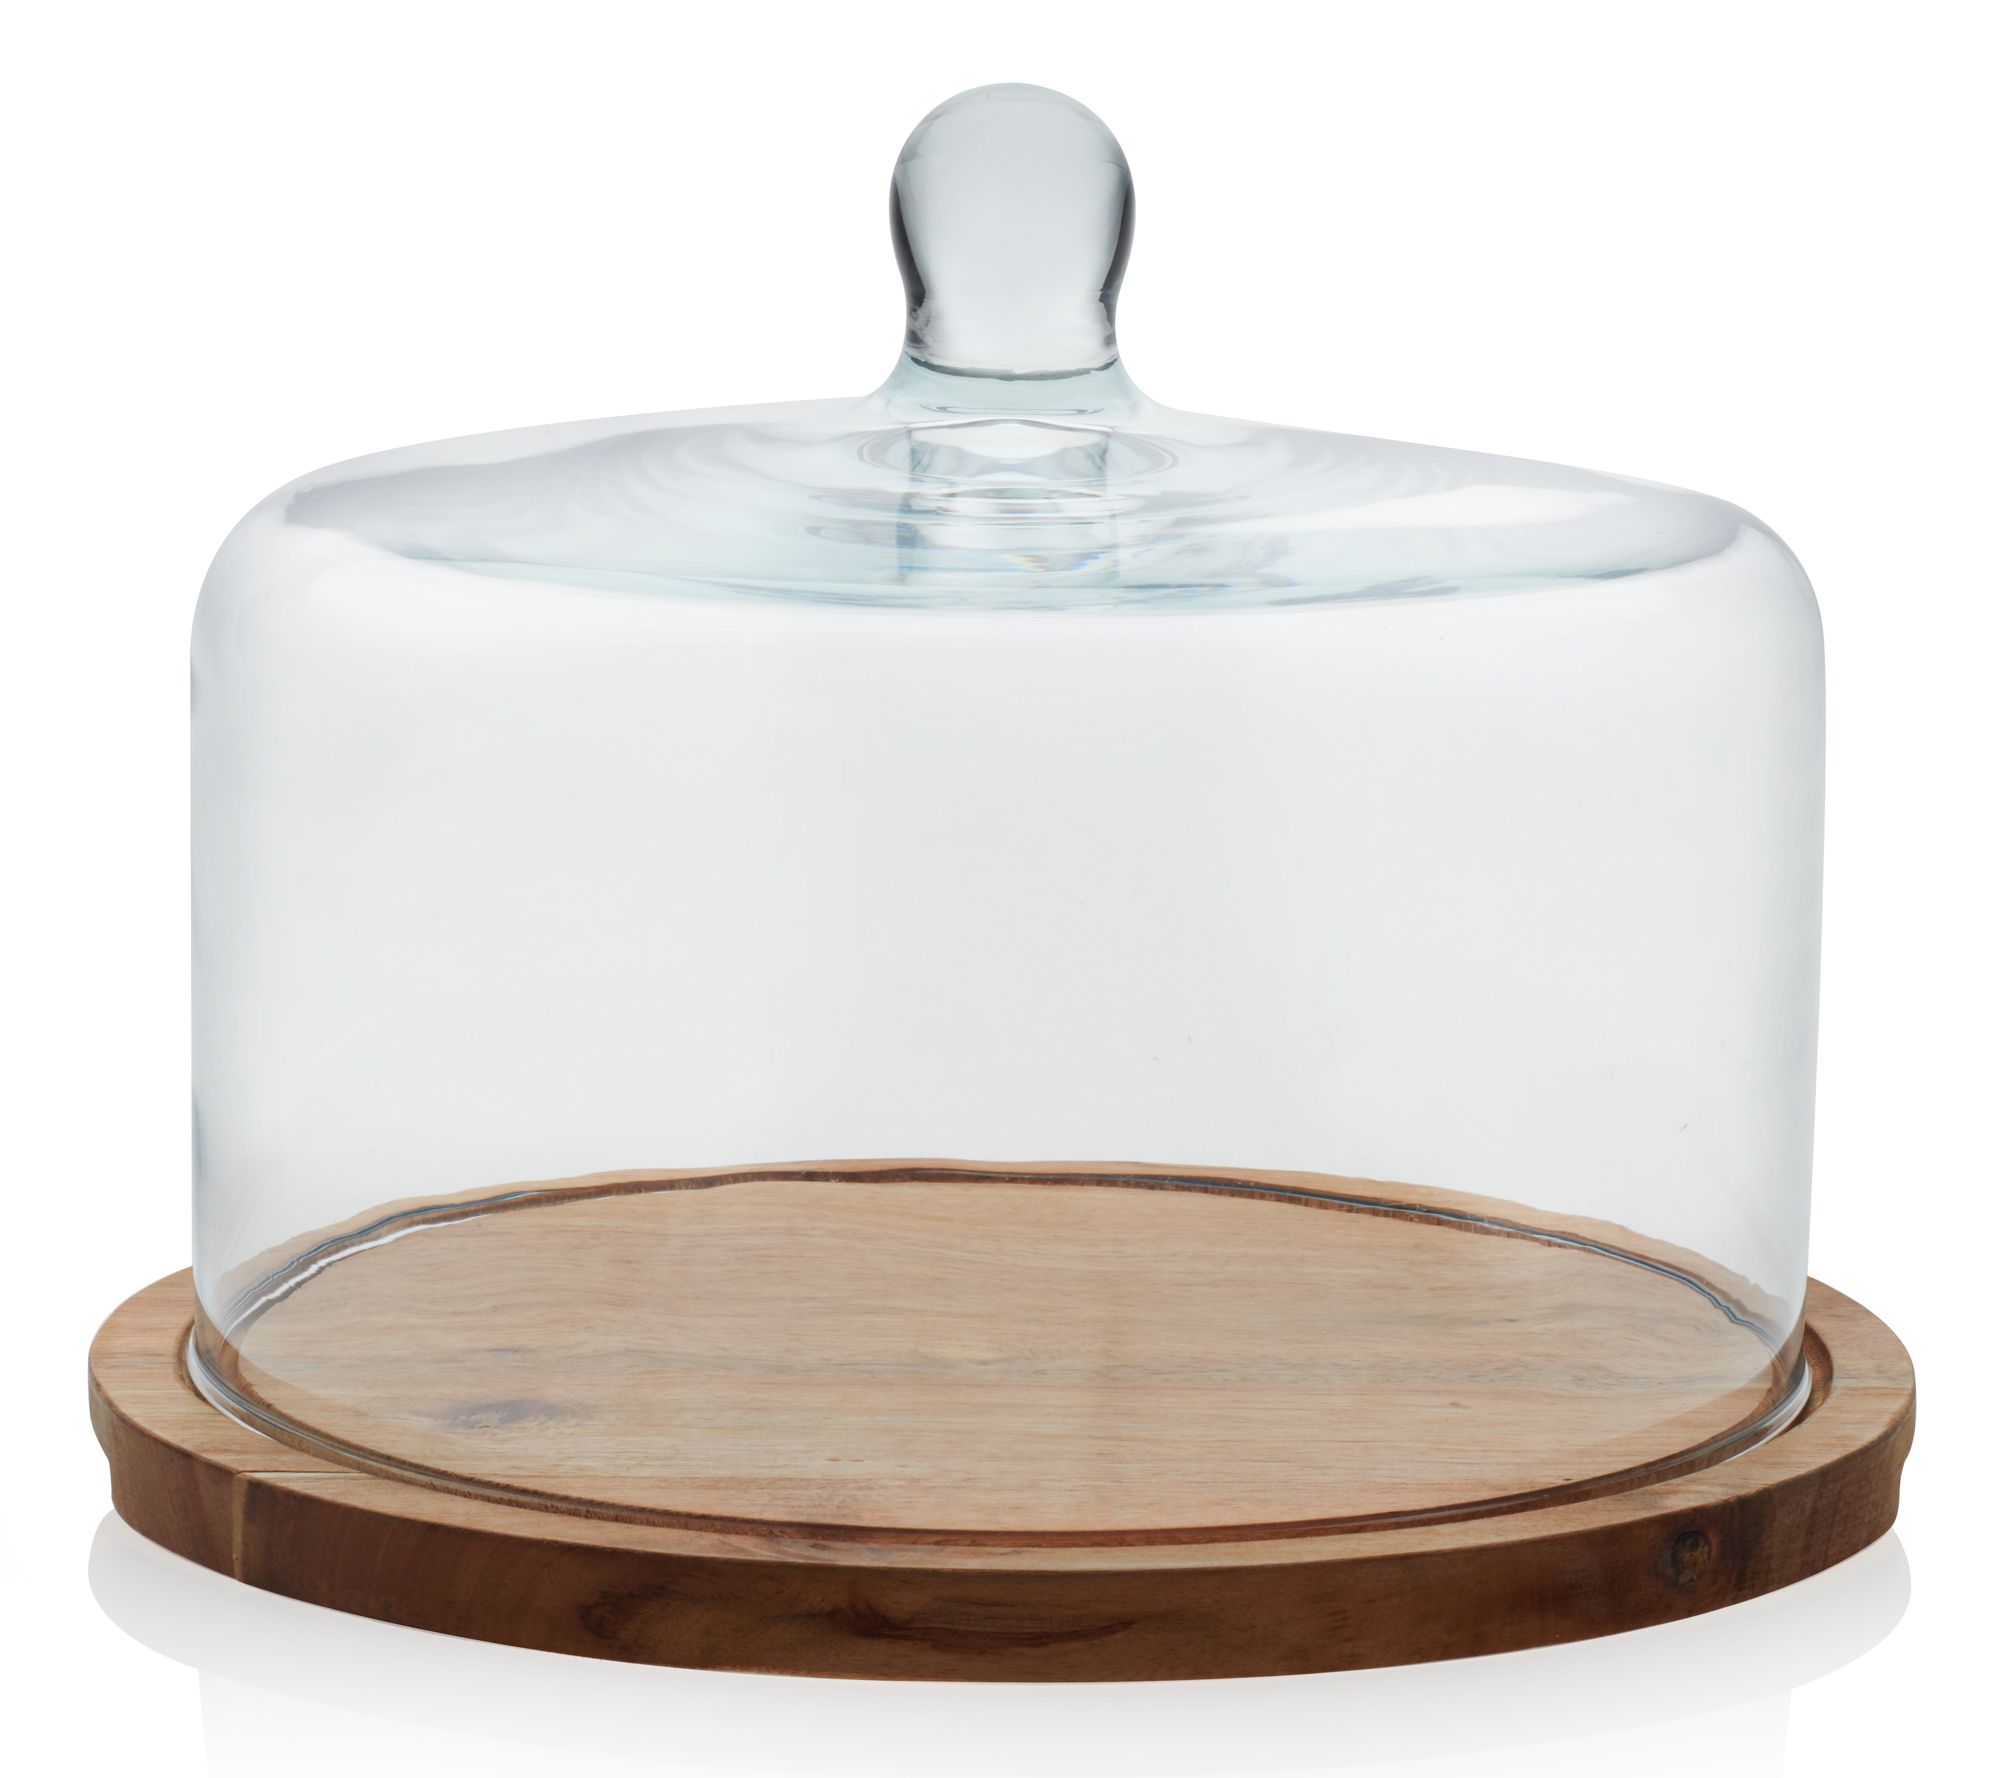 Libbey Acacia Wood Flat Cake Stand with Glass Dome